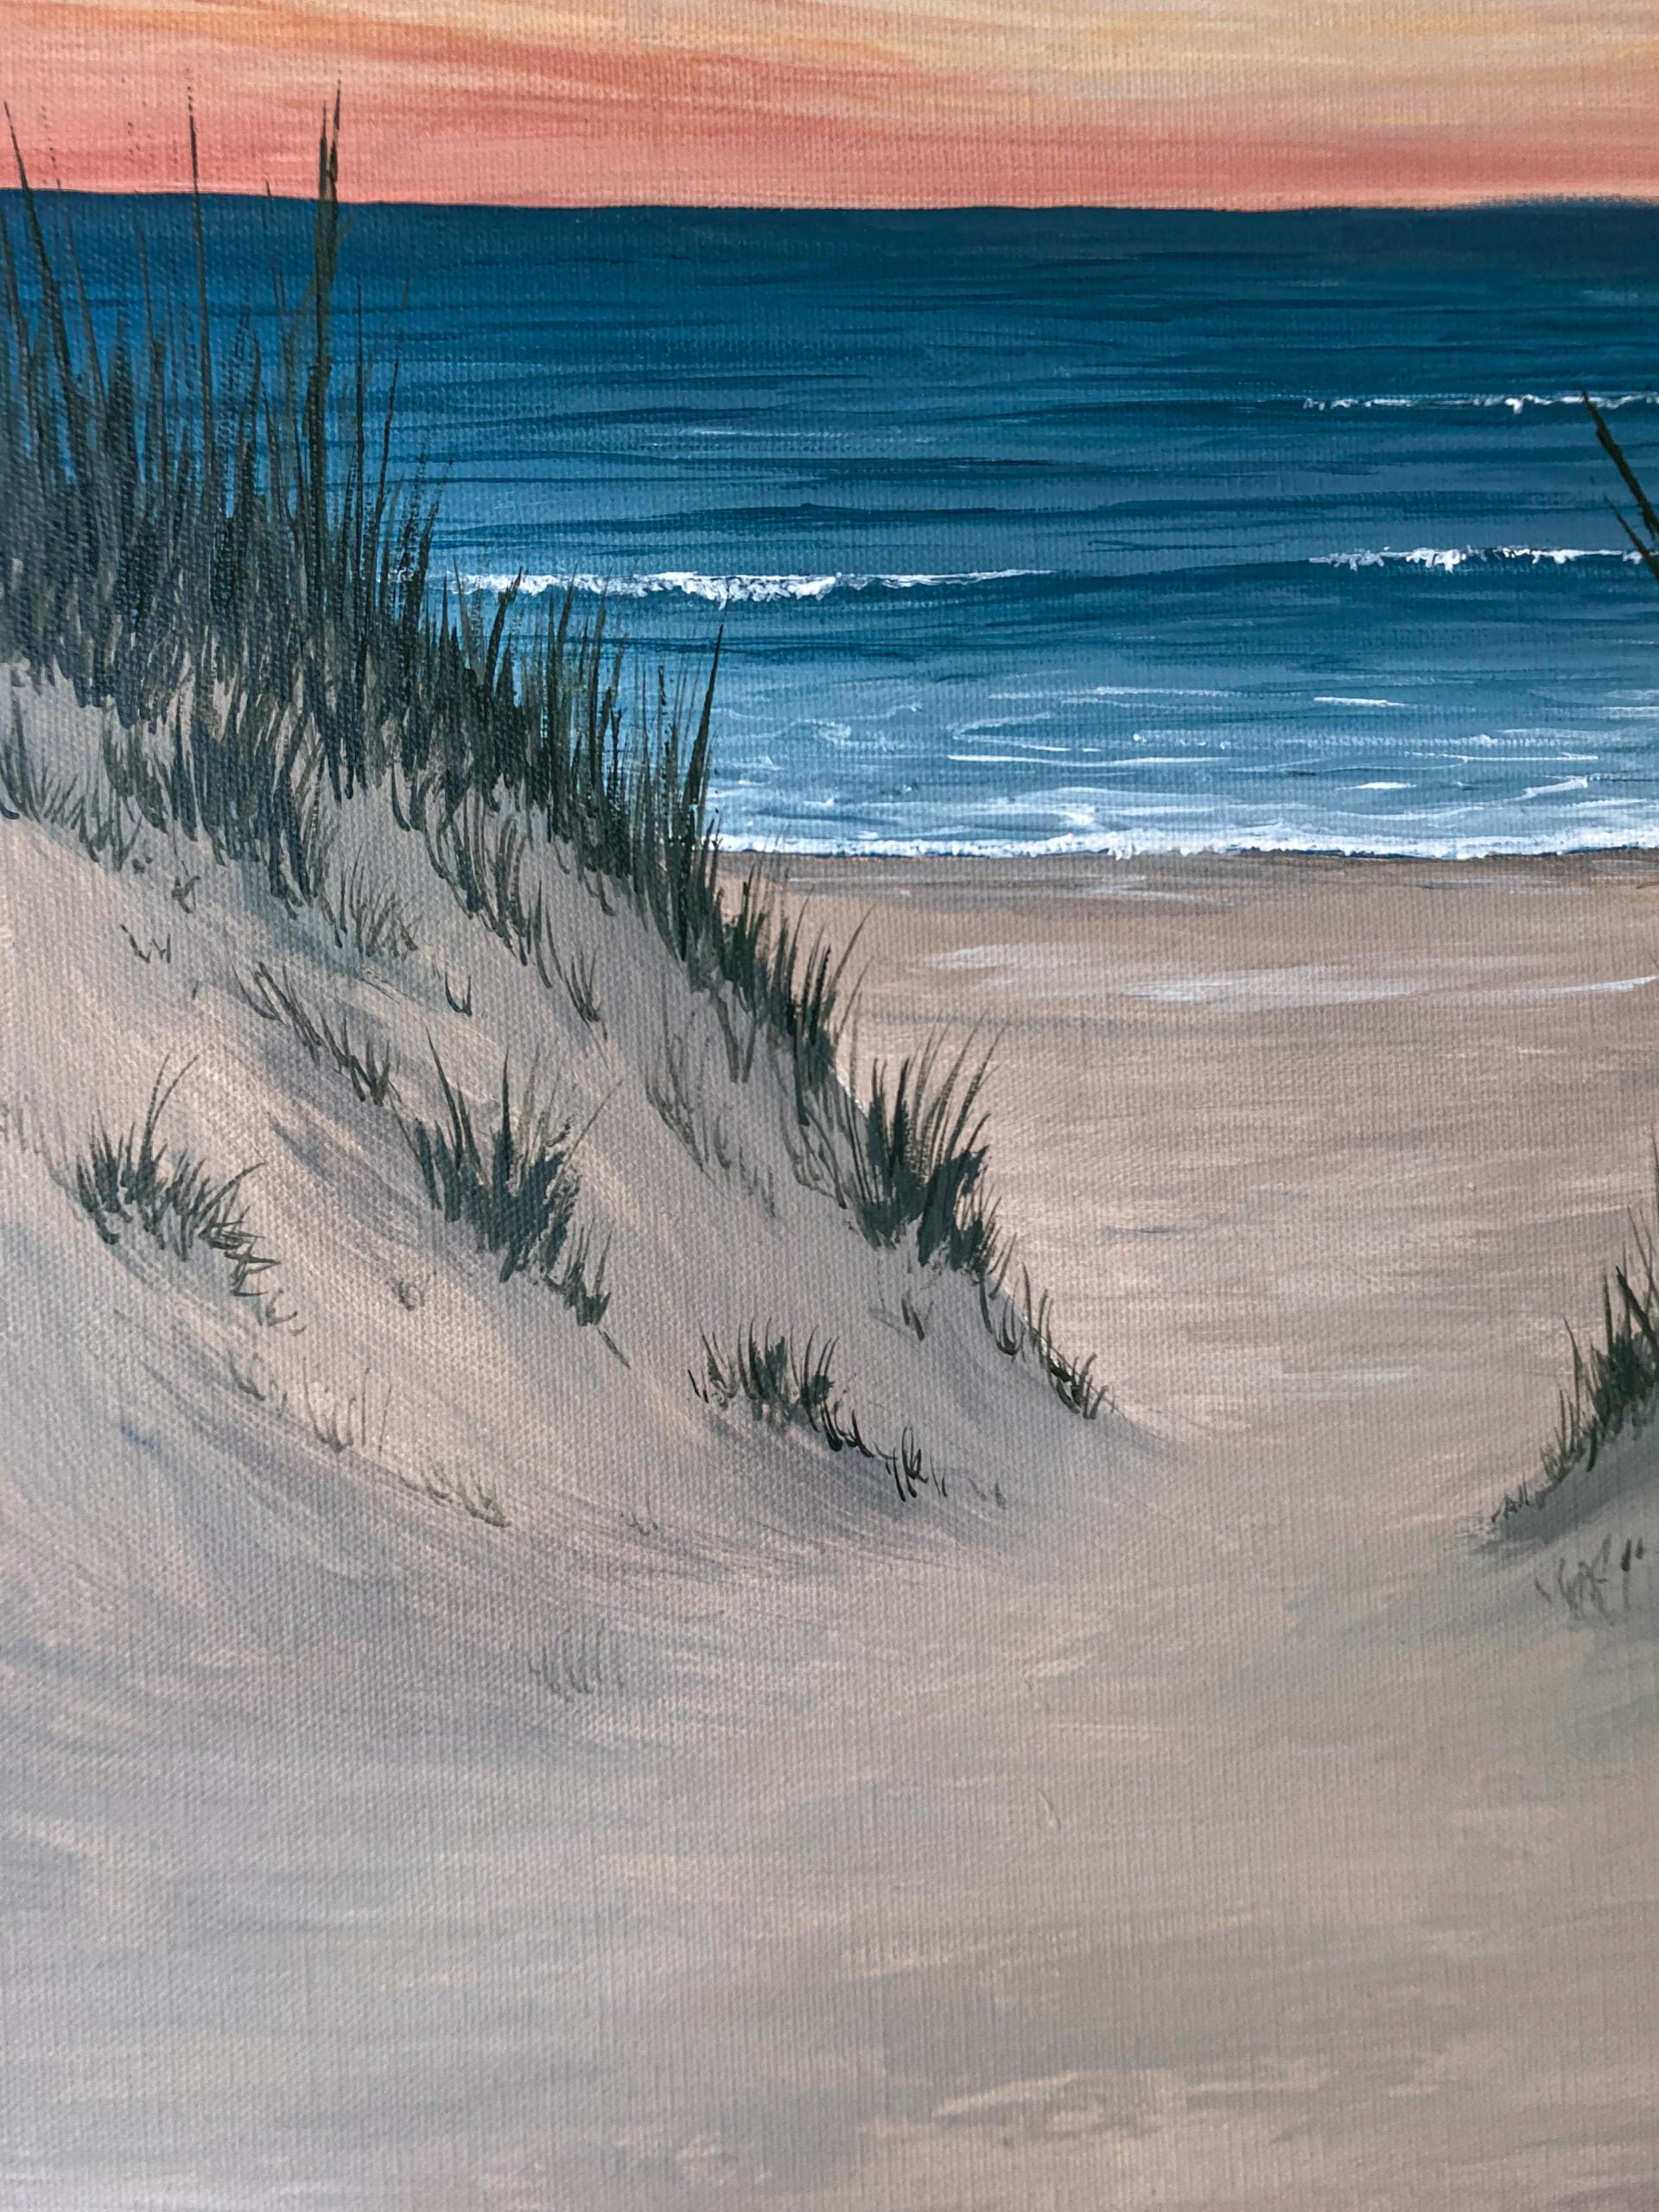 seascape painting with magical sunset and sand dunes beach vibes calming painting details